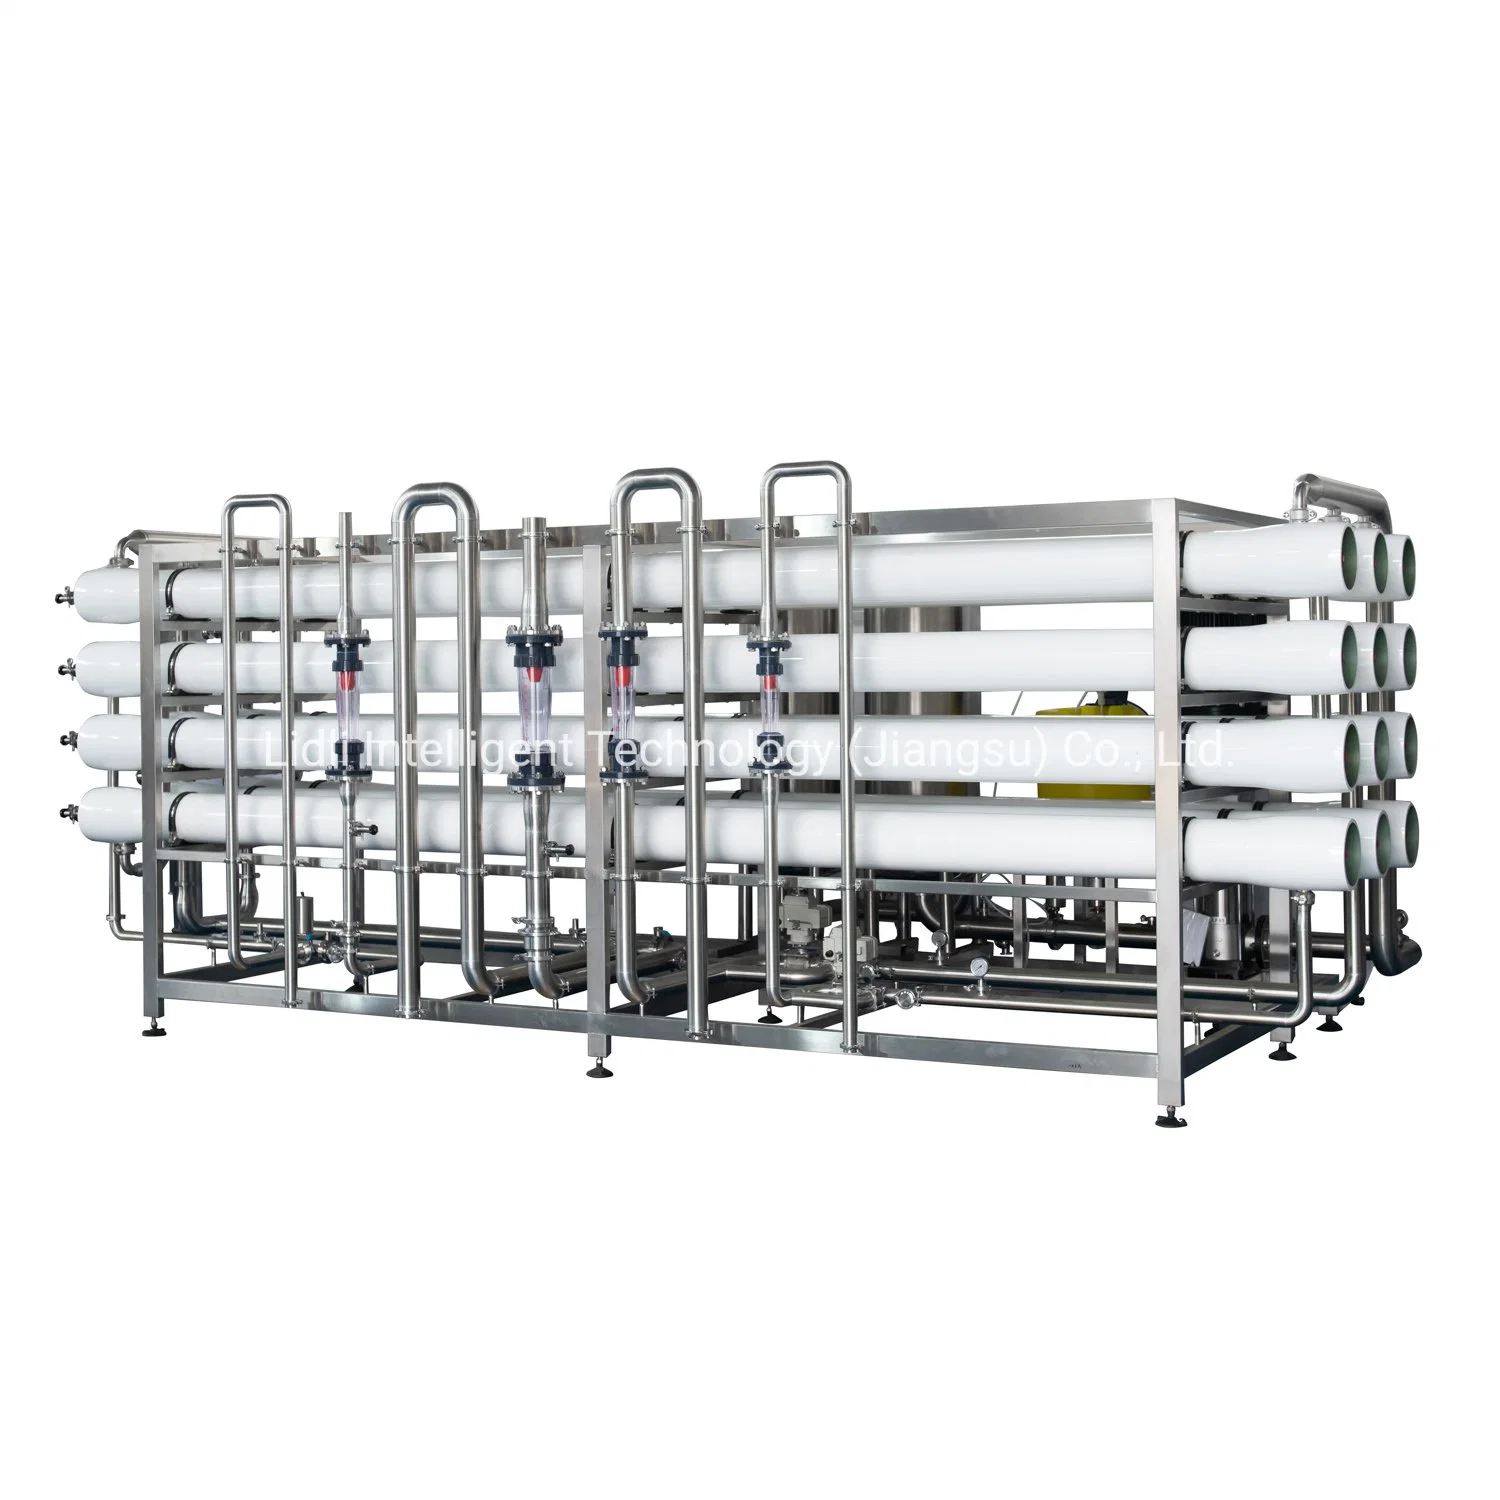 Automatic Industrial 3000lph Reverse Osmosis Water Treatment Equipment